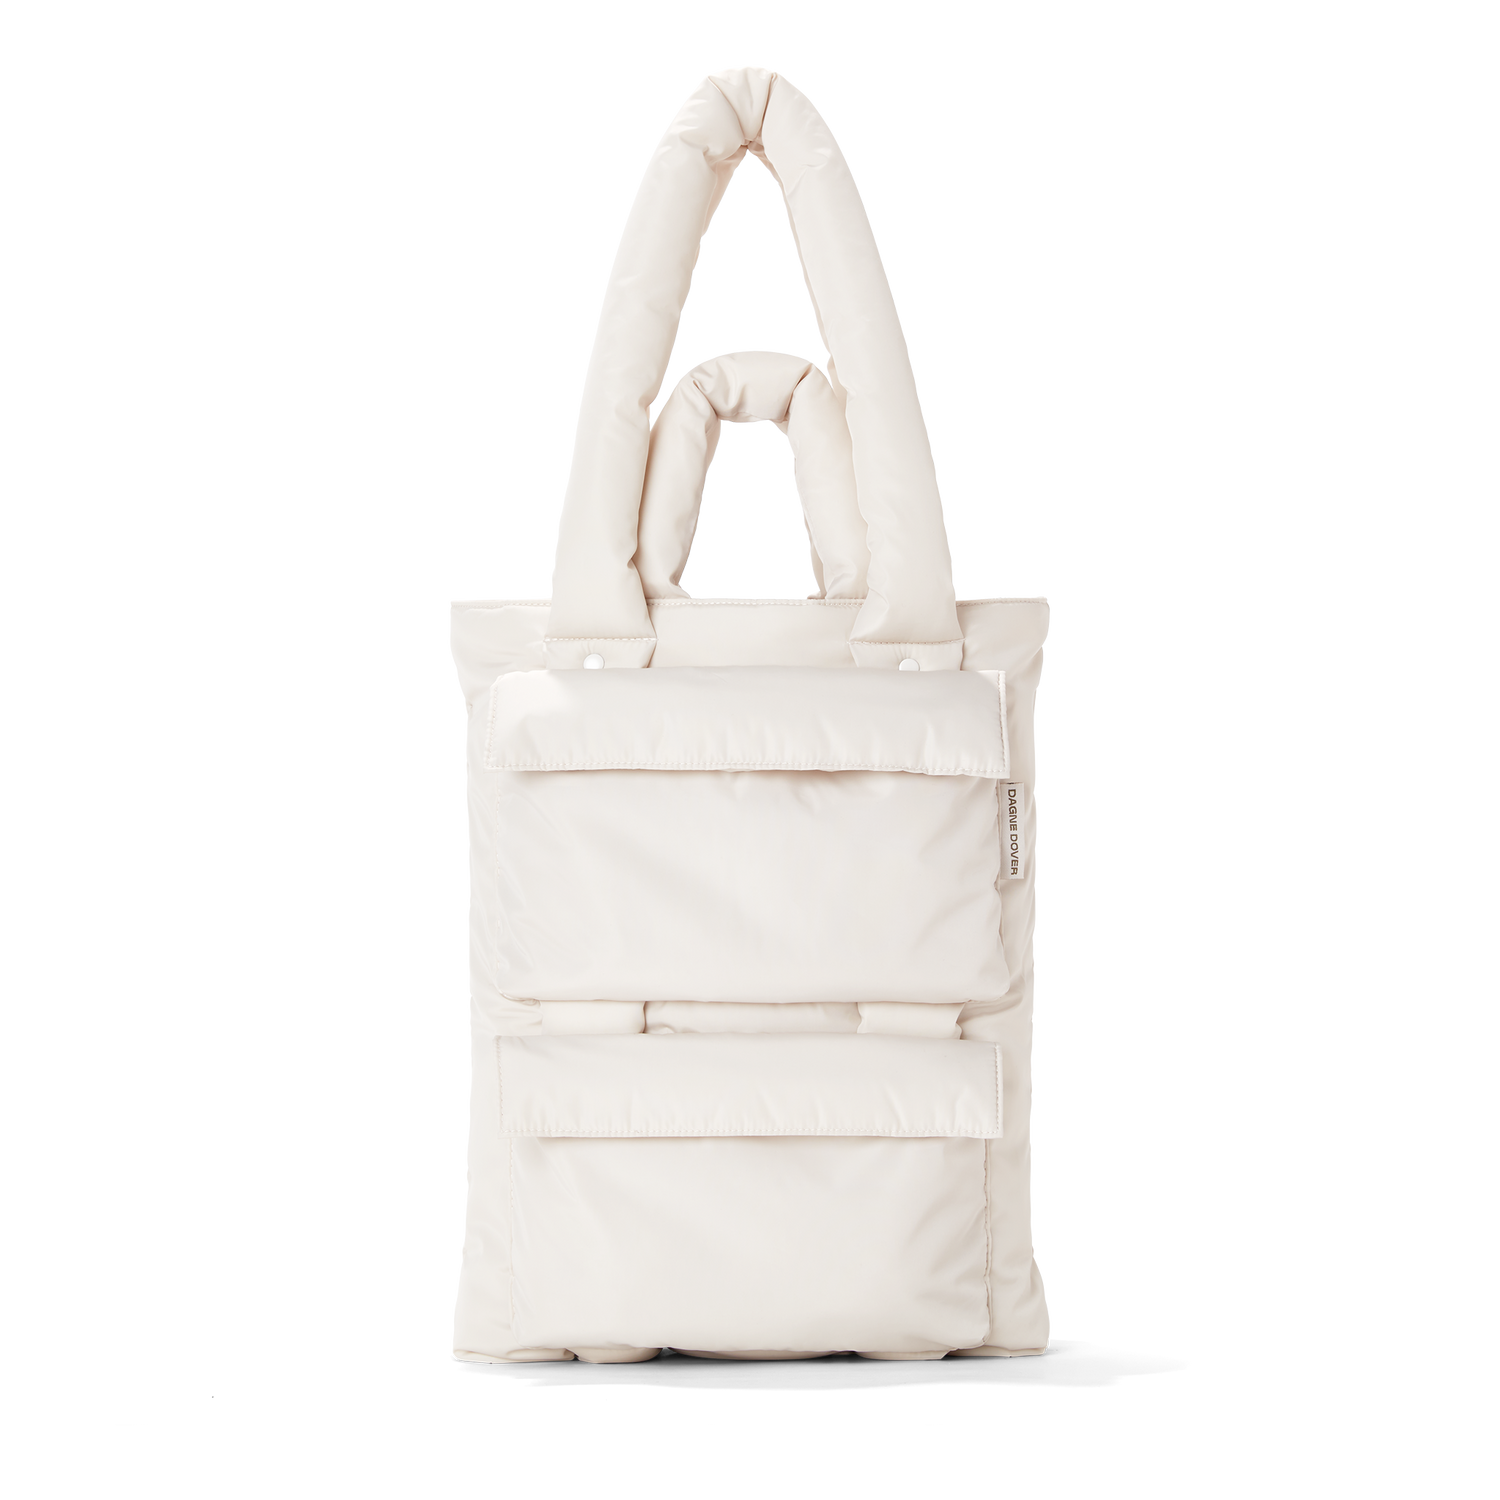 Only a few left of the limited-edition Wade Diaper Tote in Pinto! Snag one  of these babies before they're gone for good.